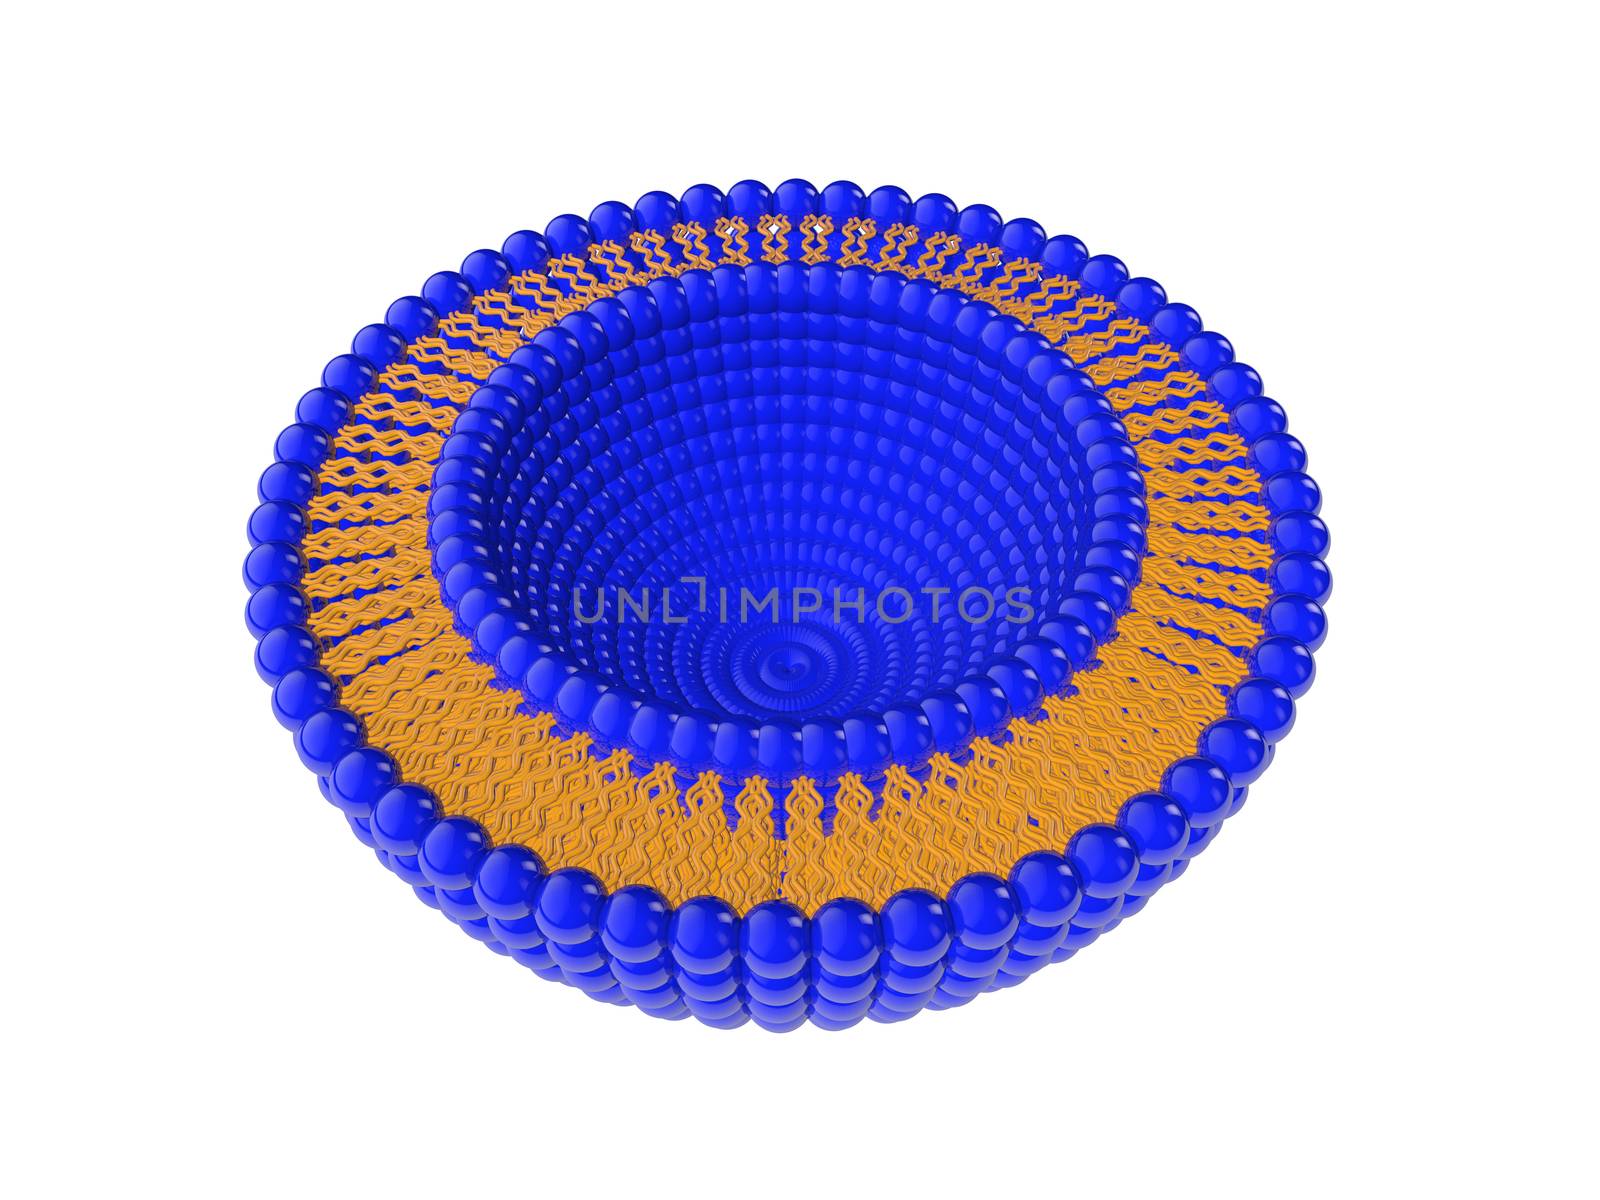 Medical 3D illustration of liposomes bi-layer structure isolated on white background